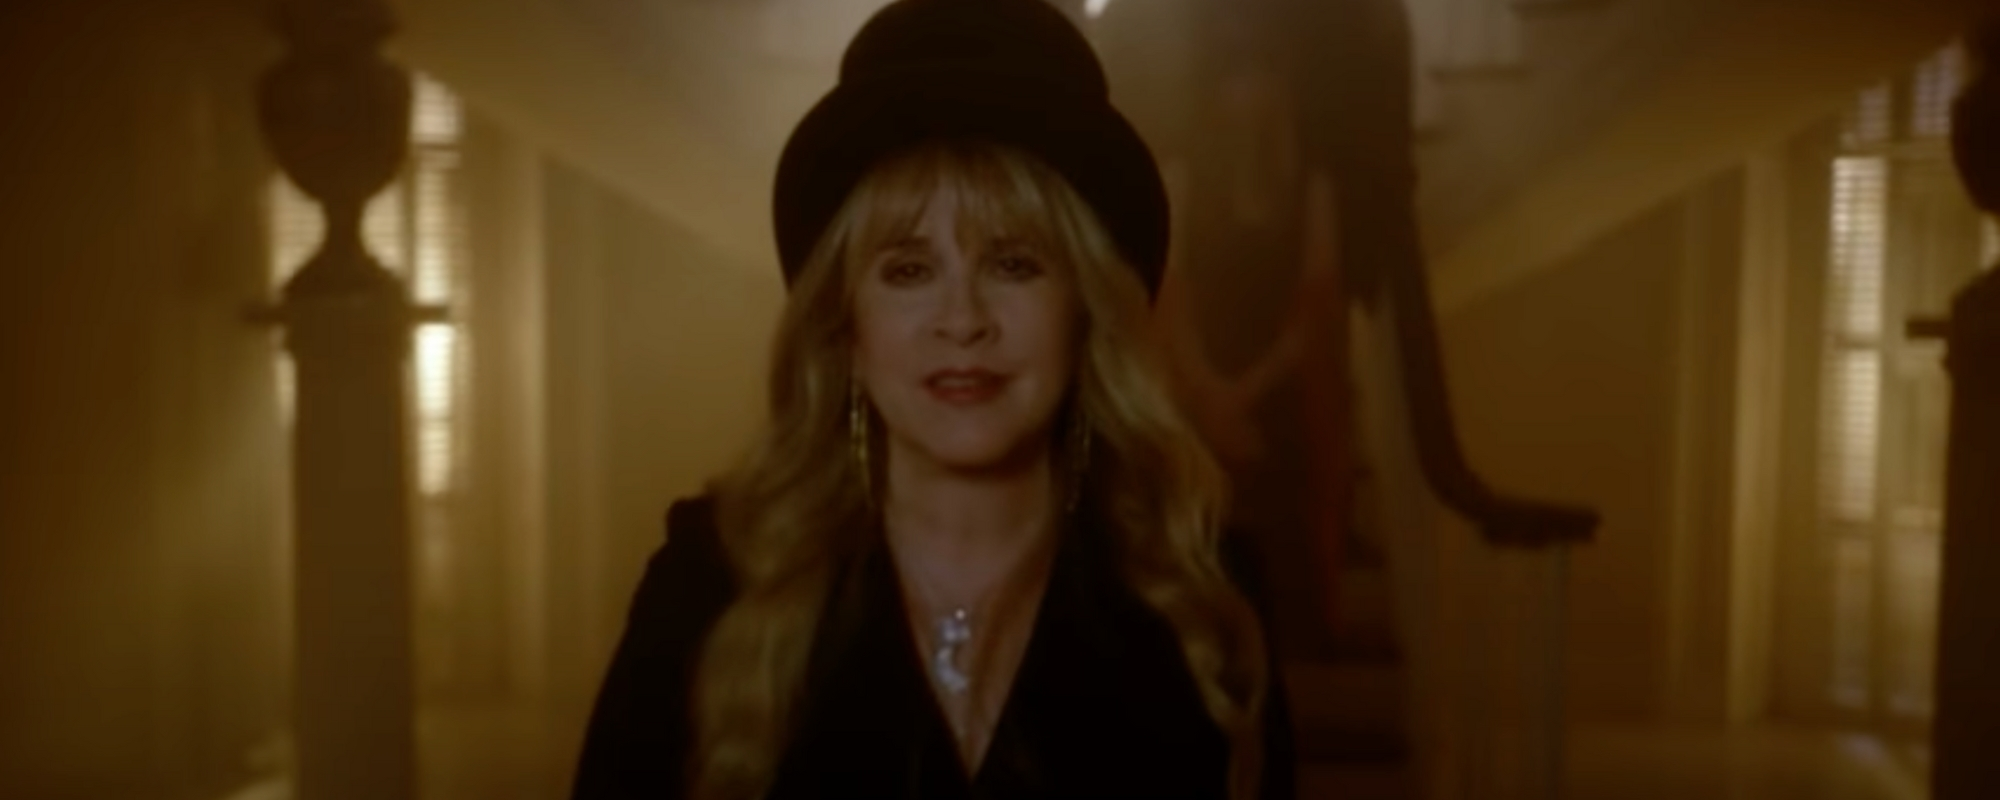 Remember When Stevie Nicks Bewitched Lily Rabe on ‘American Horror Story’?